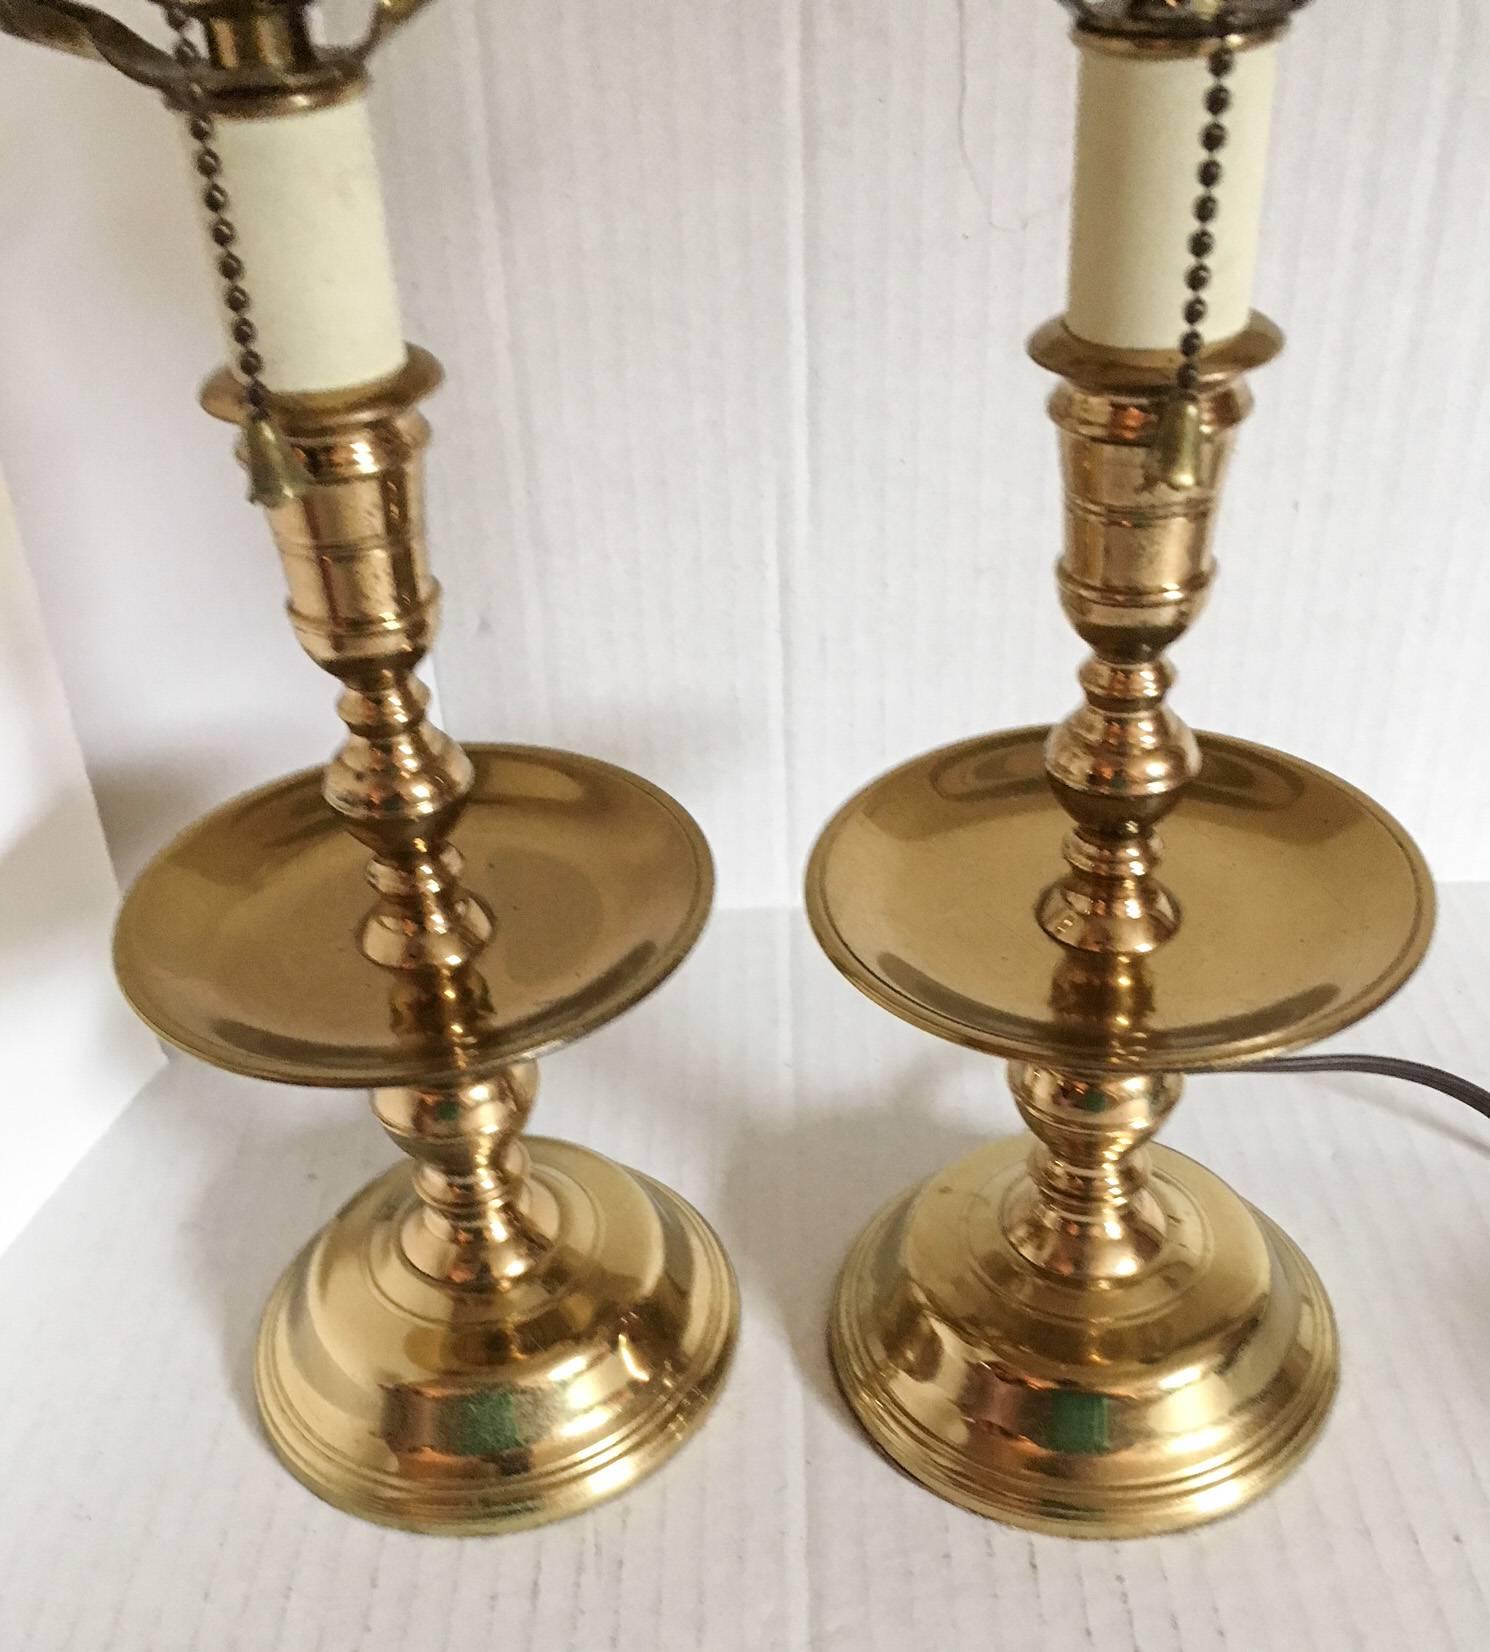 Fantastic pair of 1950s Virginia Metalcrafters table lamps, made in Waynesboro, Virginia, circa 1950s. Each has a pull chain mechanism with updated wiring in working condition. Lamps have a lovely warm sheen and heavy quality to them, a